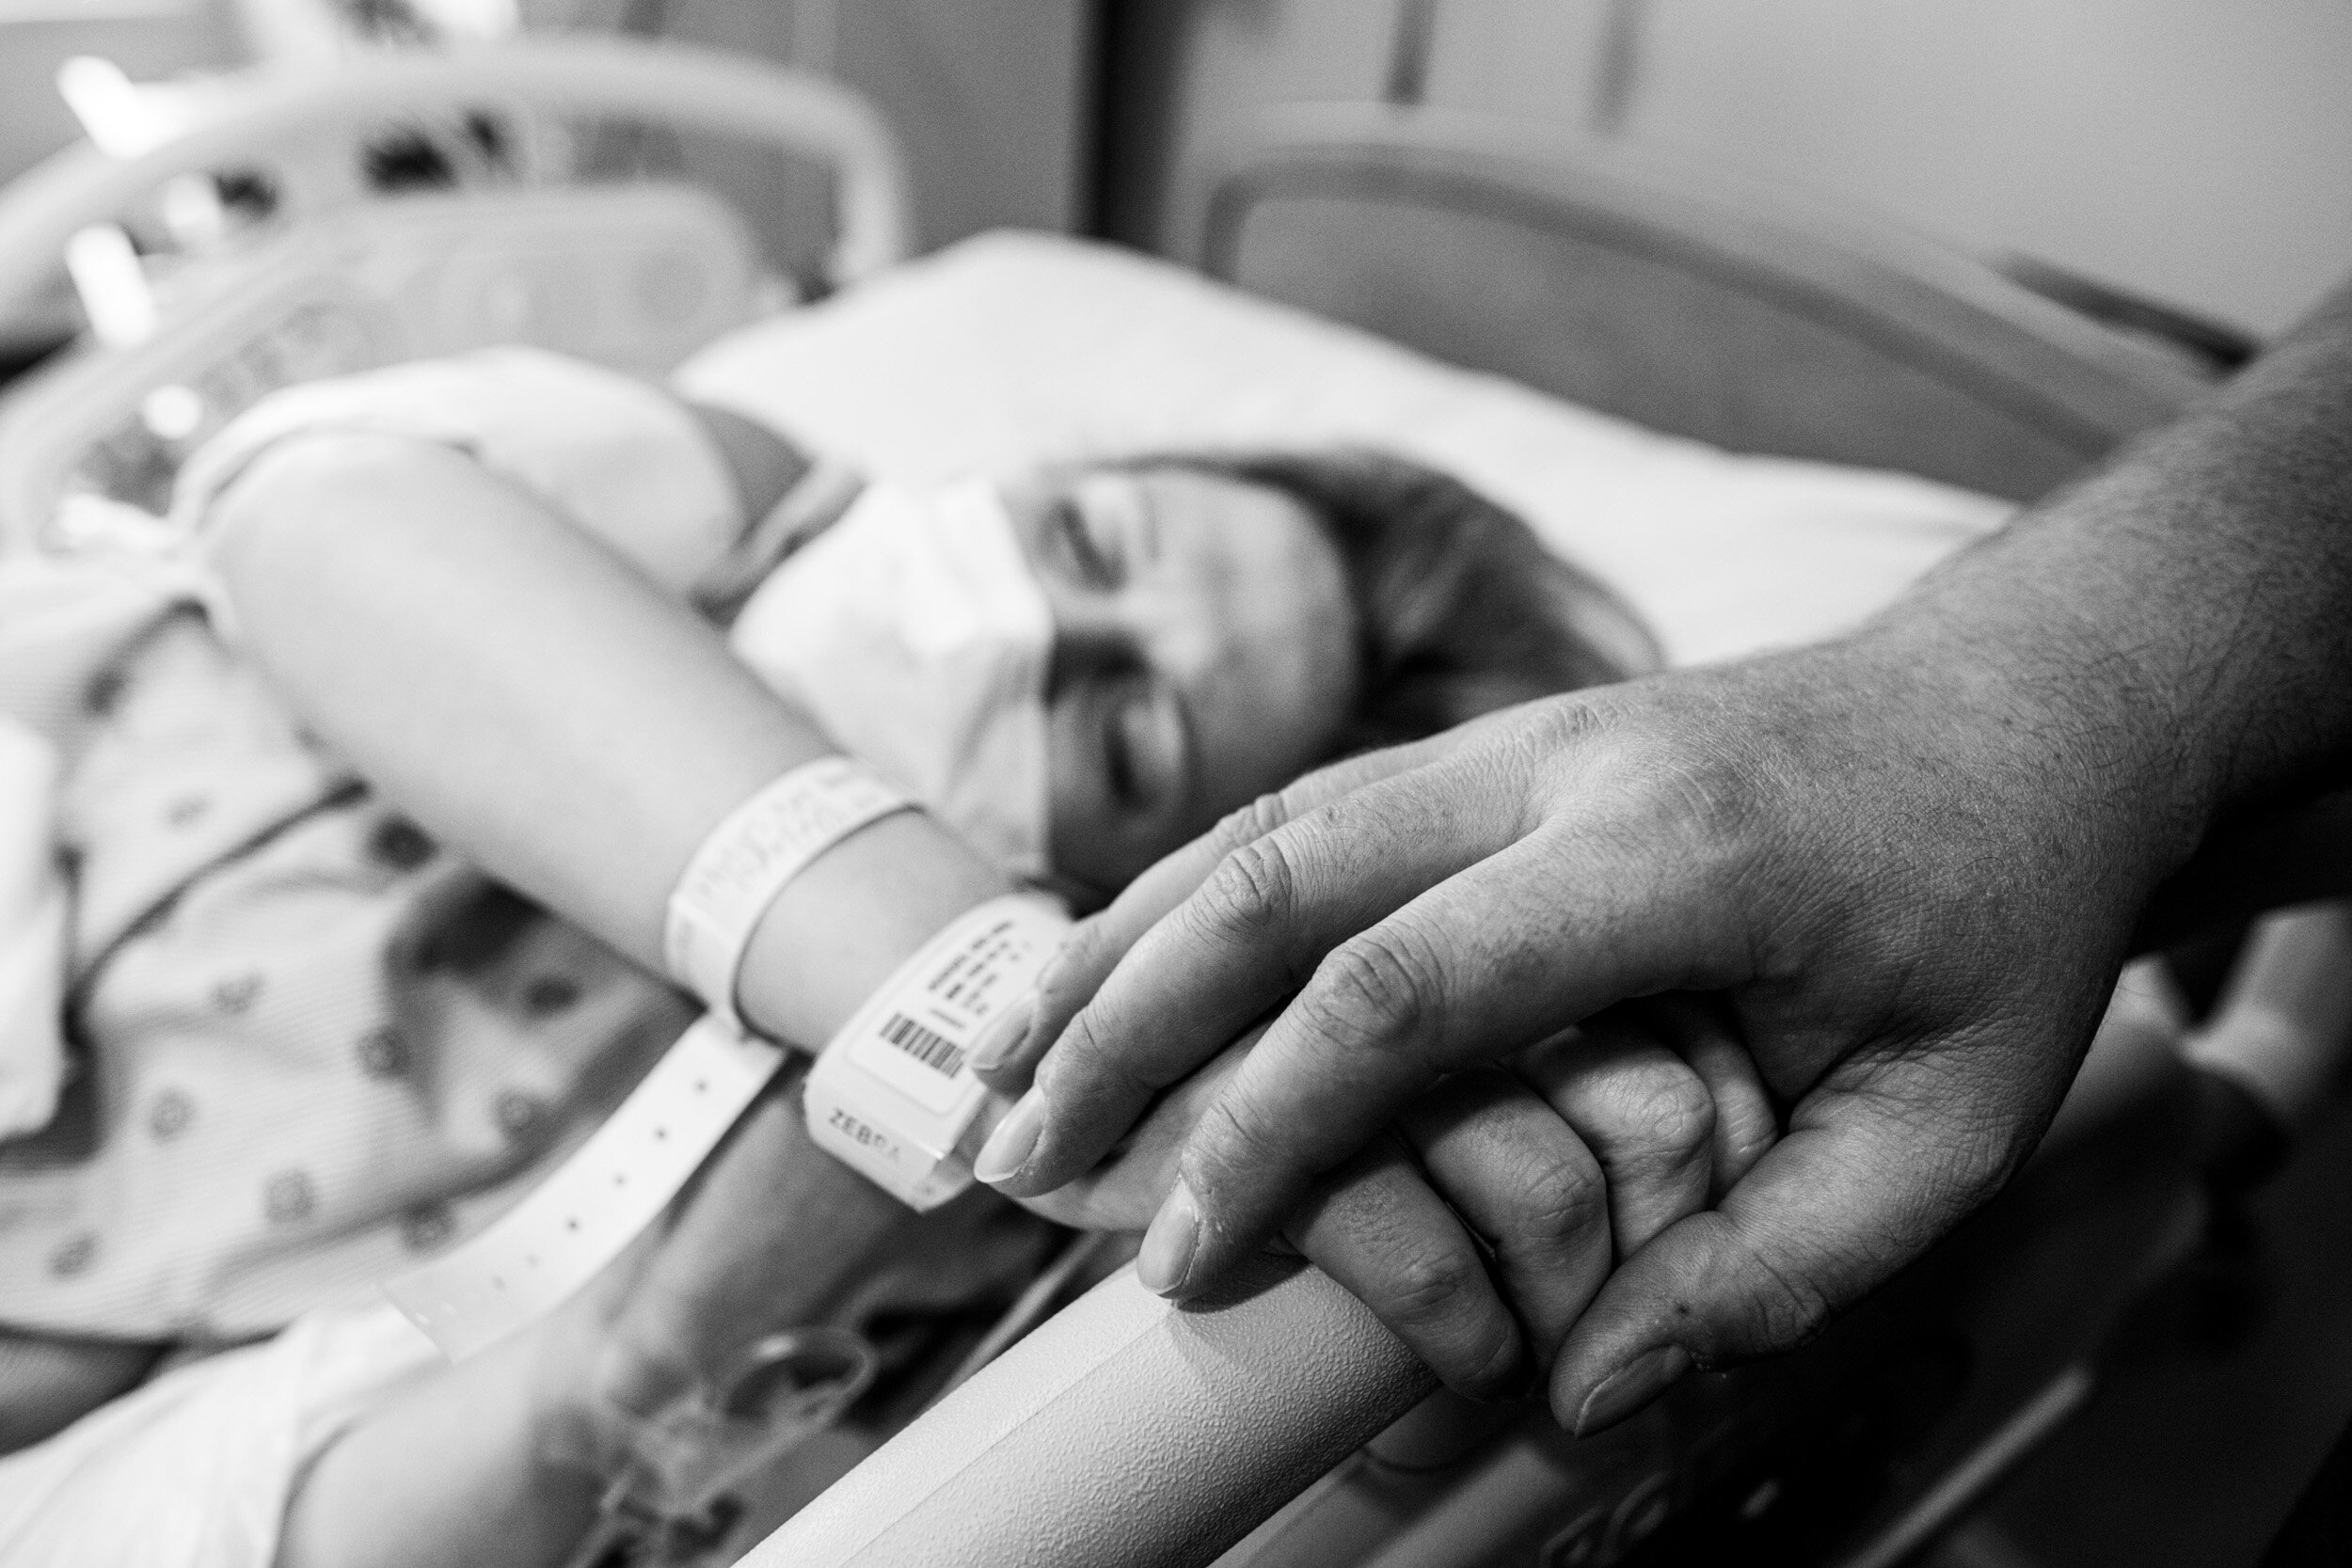 husband's hand on his wife's hand while she's in labor